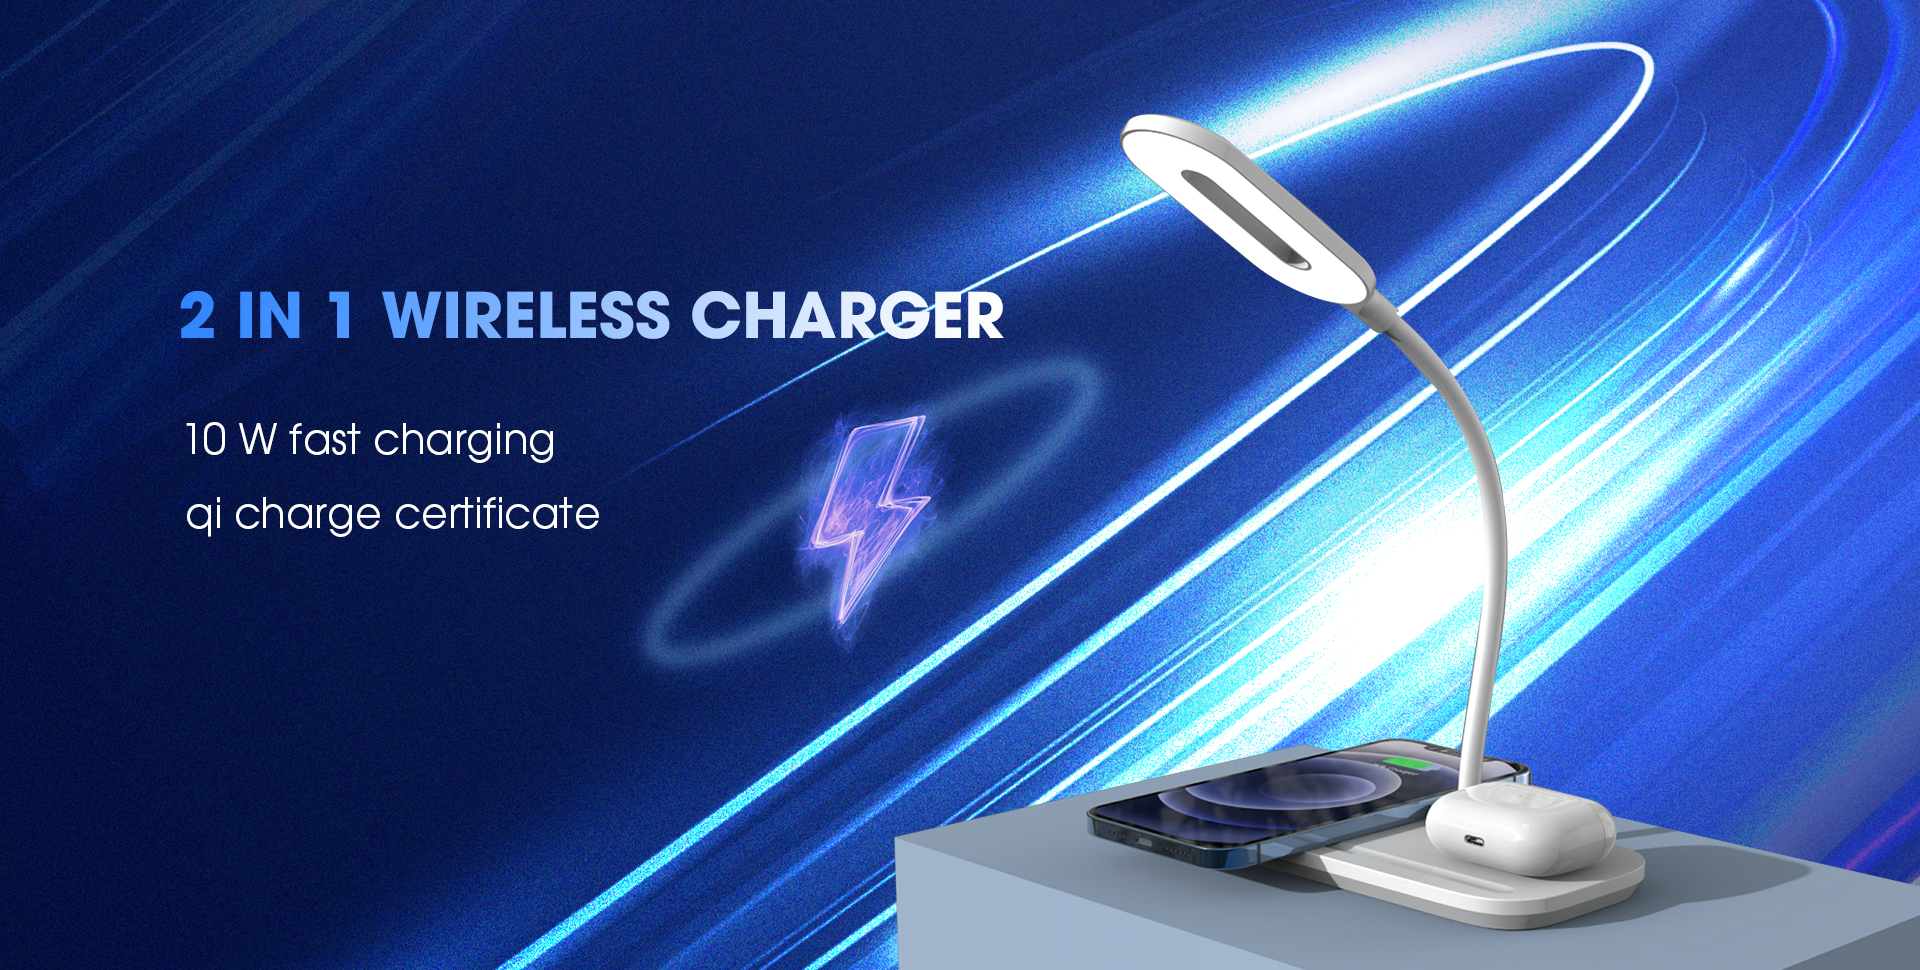 2 in 1 wireless charger.10W fast charge.qi safe charge certificate